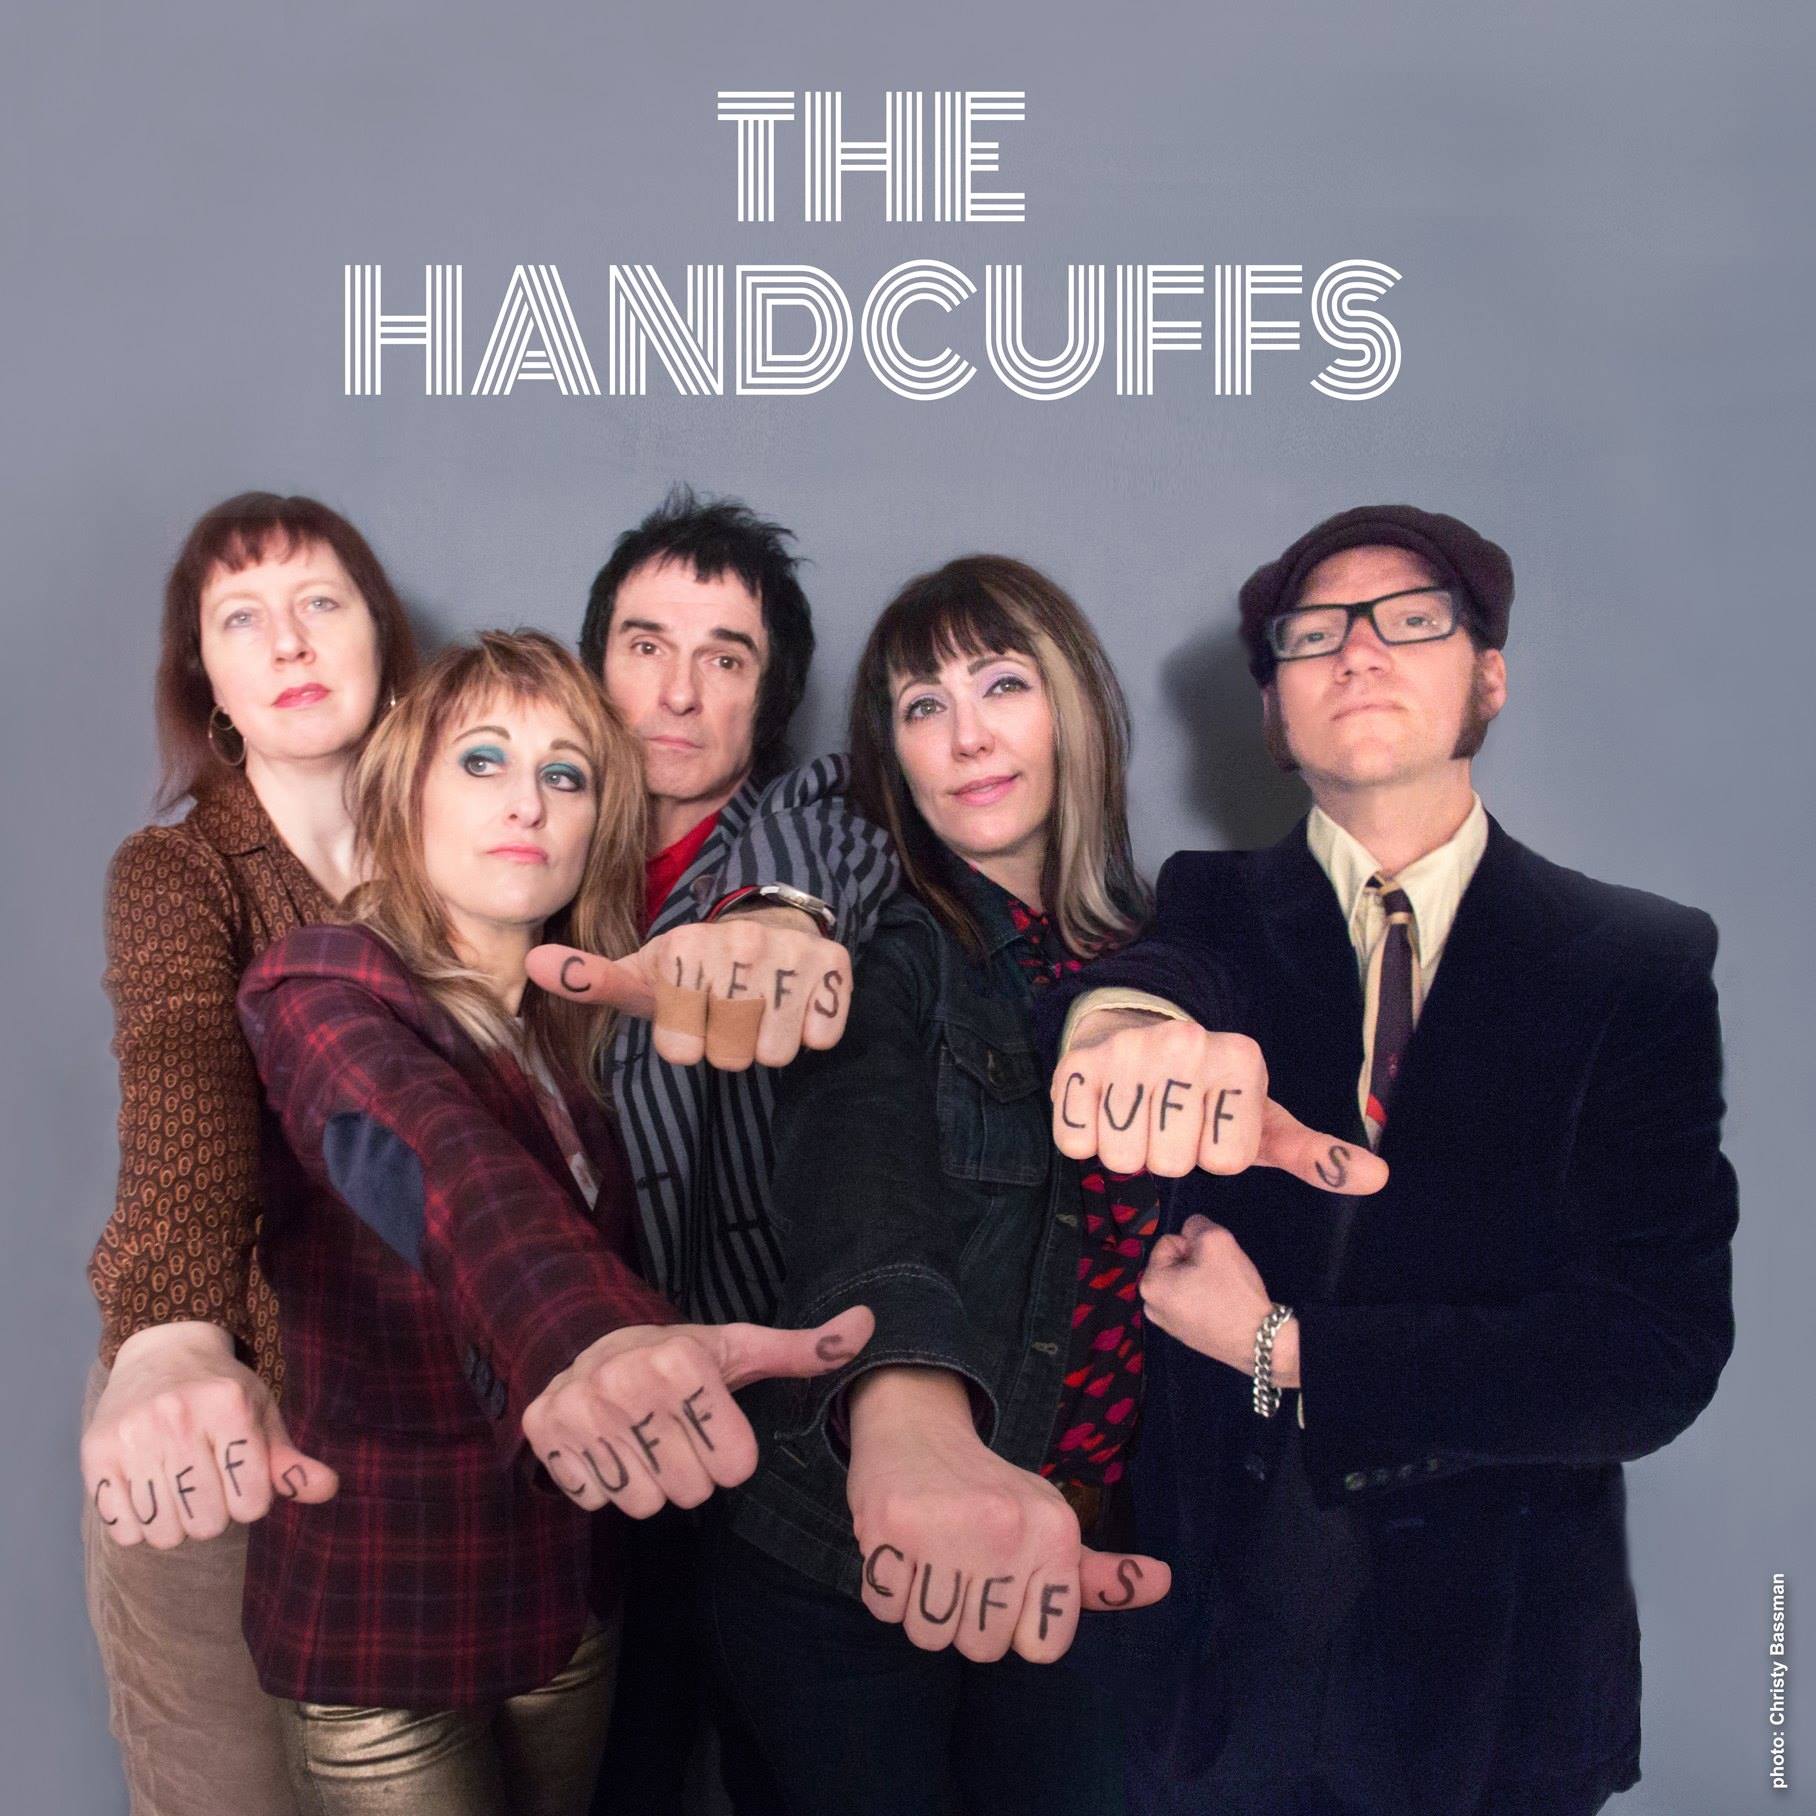 Art for Love Me While You Can by The Handcuffs